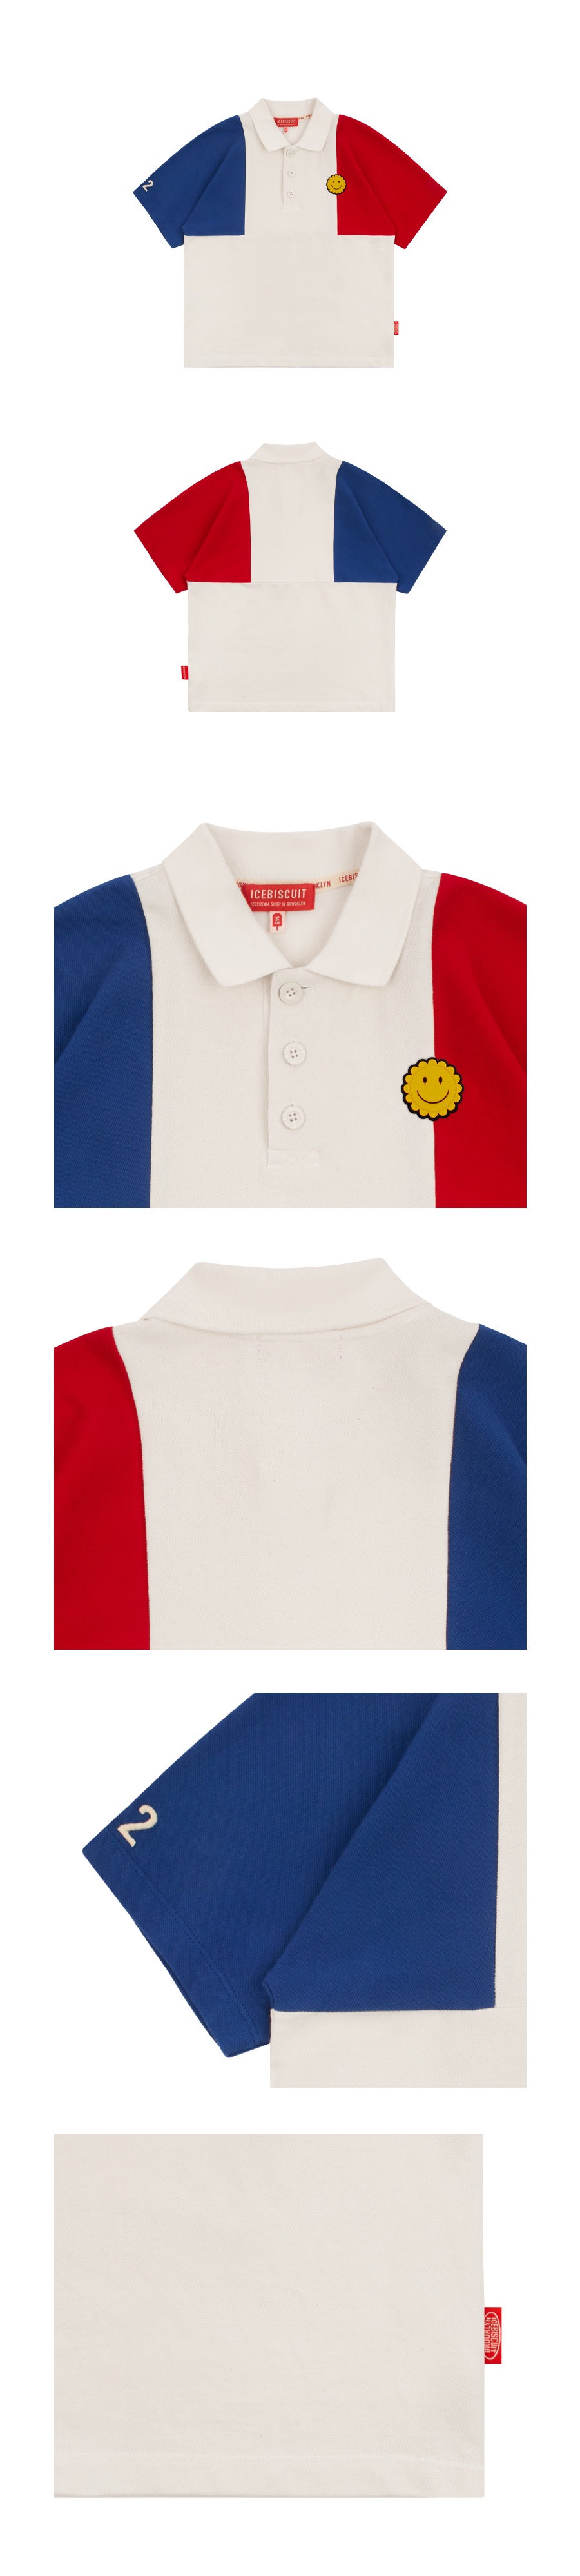 Smile icebiscuit color block polo shirt 상세 이미지